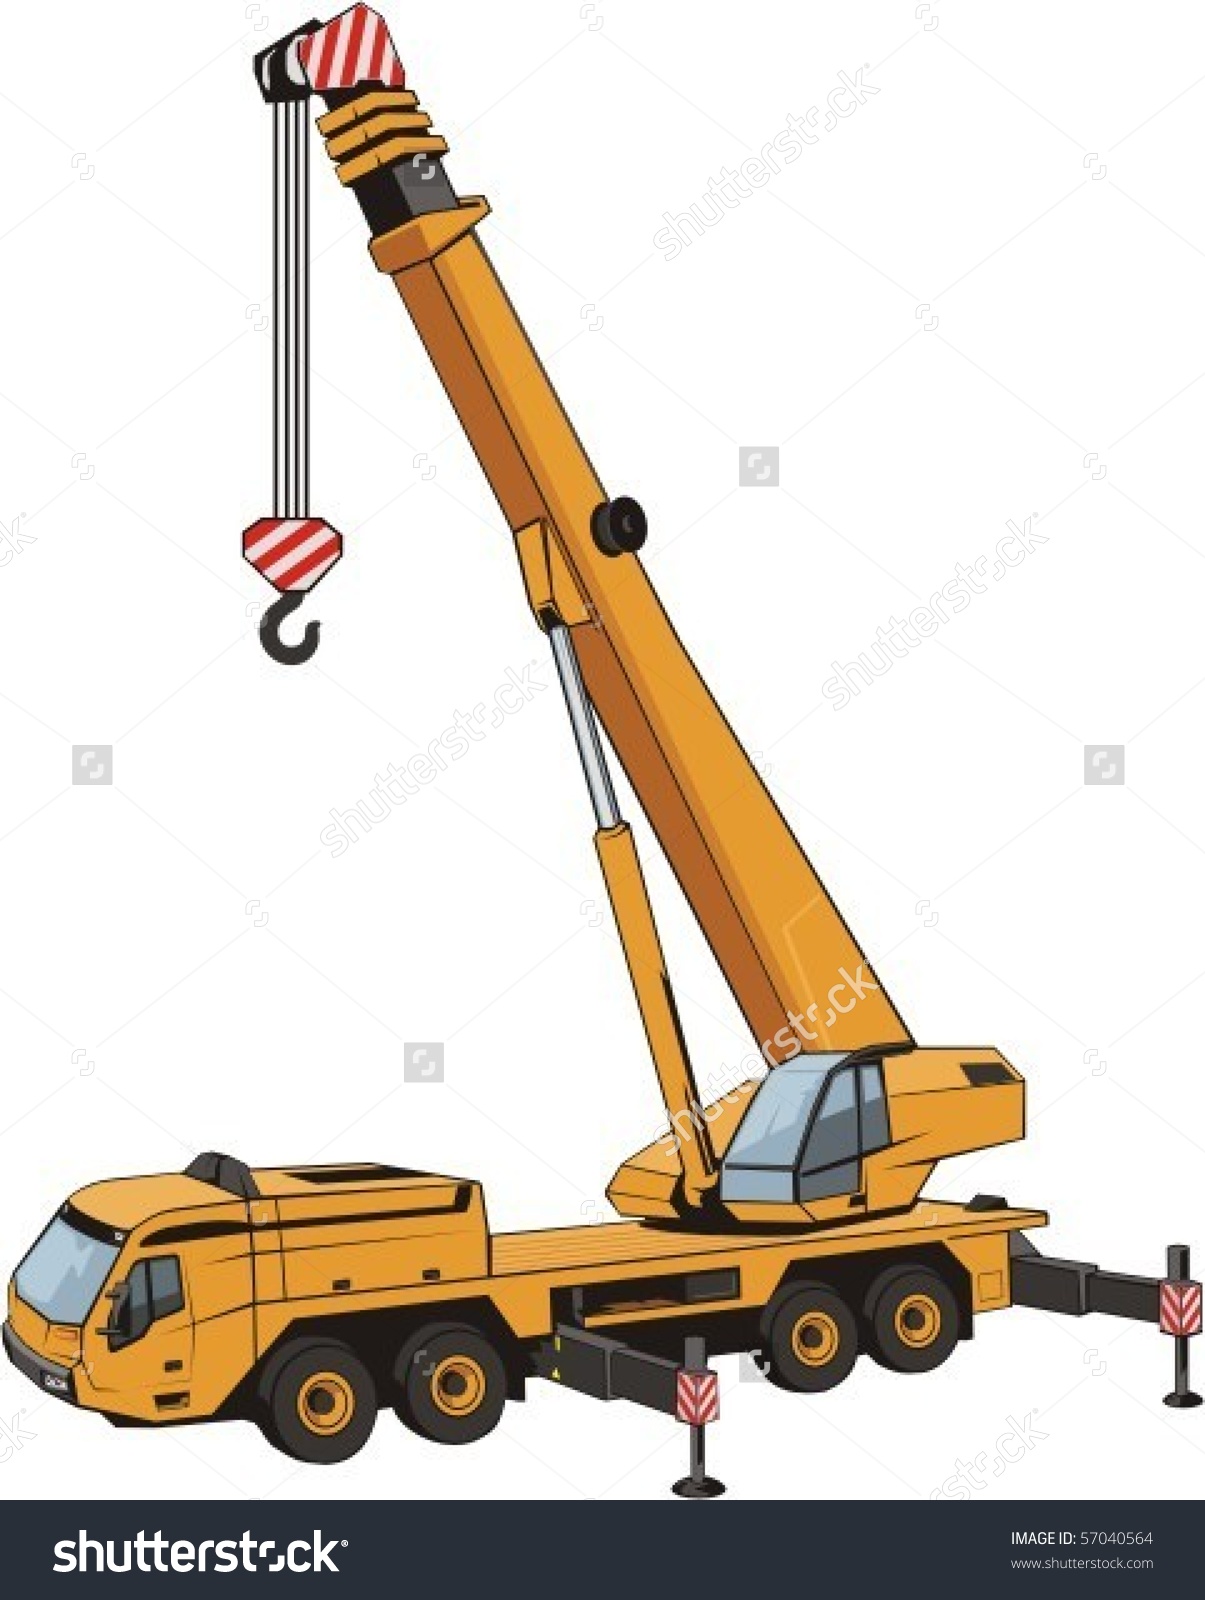 Mobile Crane Lifted By Arrow Stock Vector 57040564.